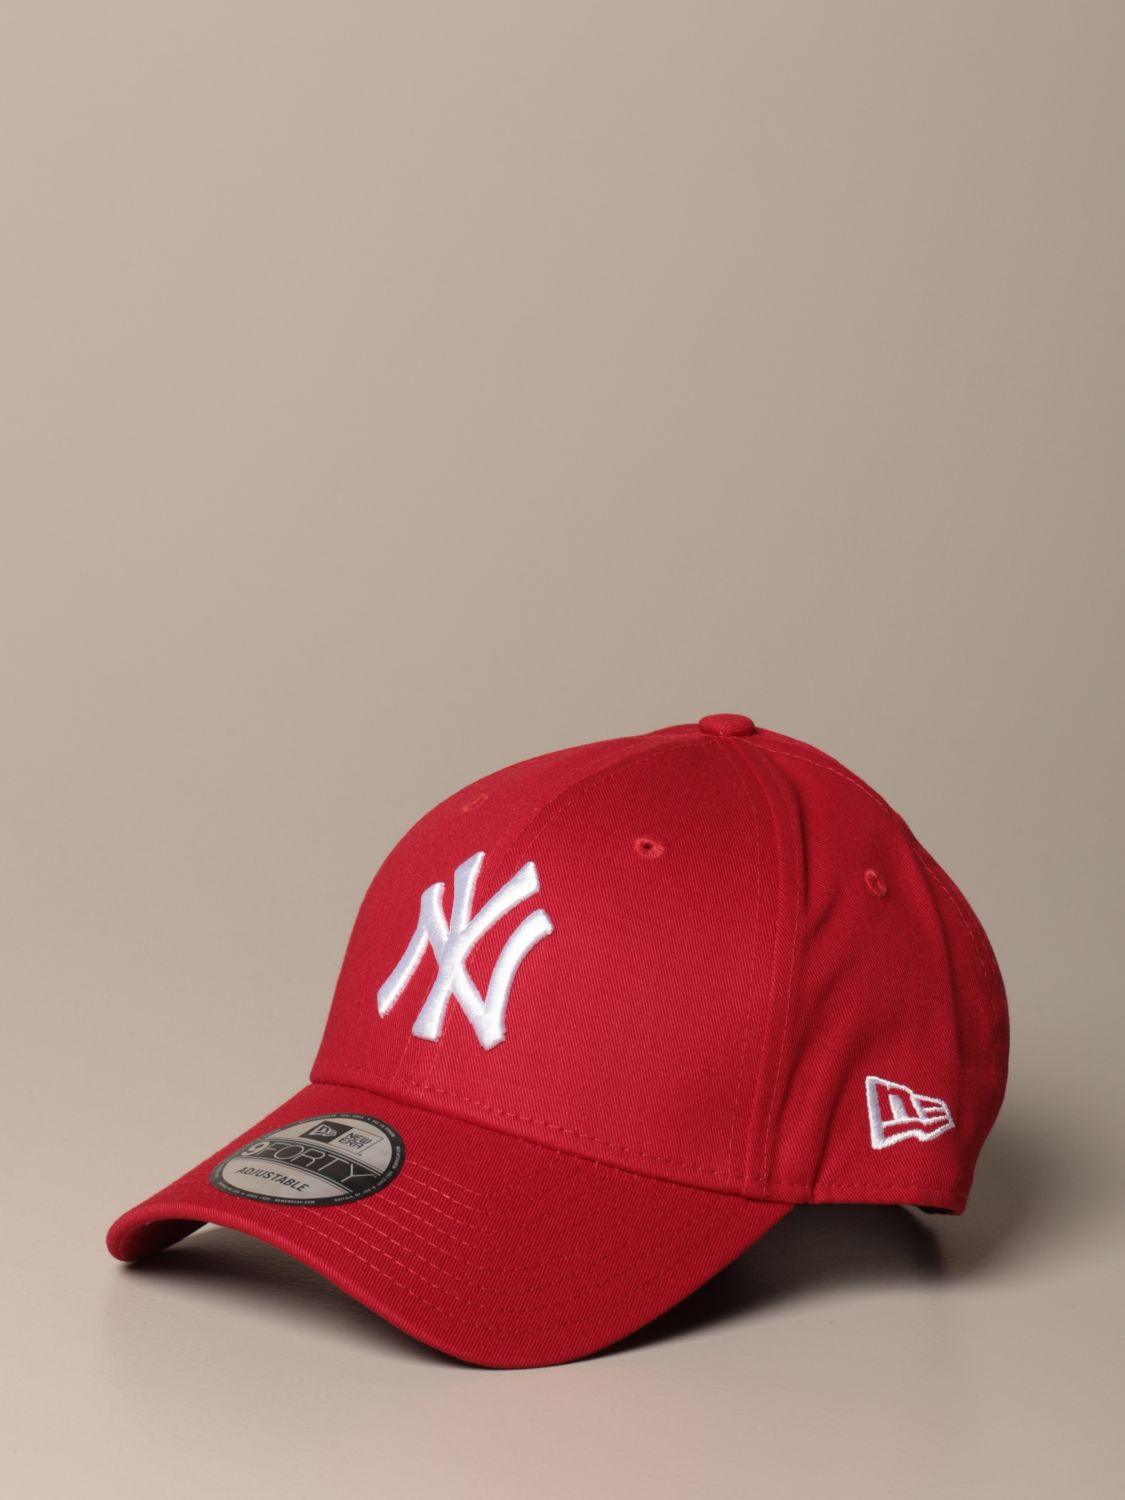 Lux X New Era 9Forty Cap - Red